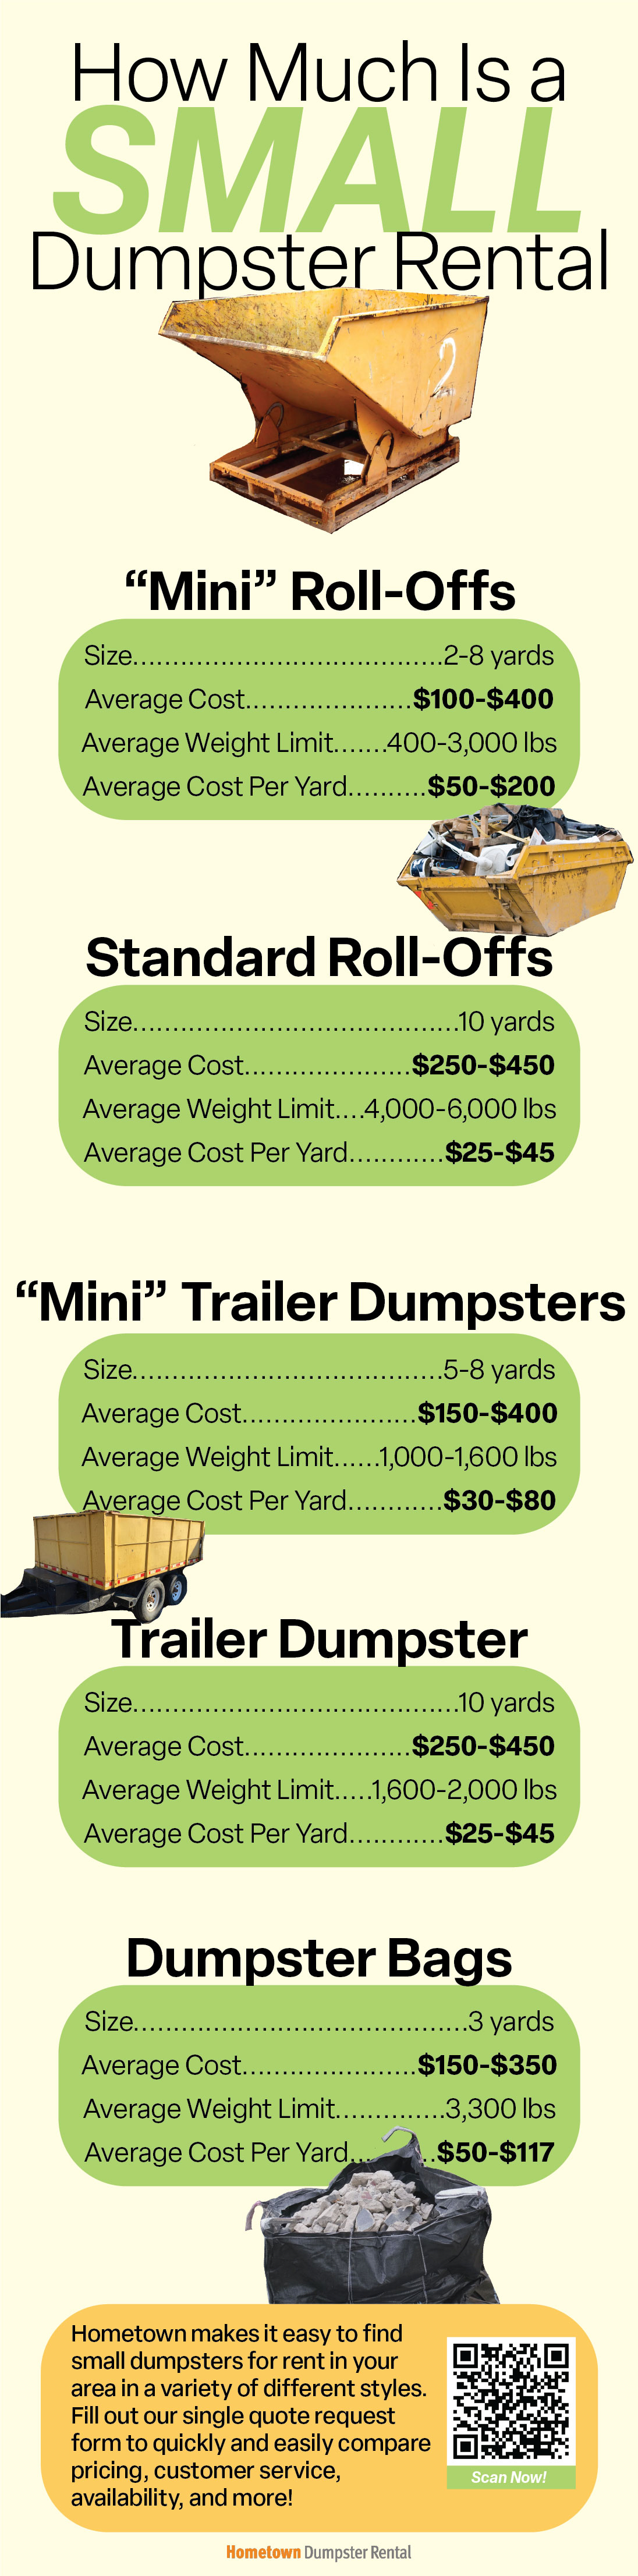 How Much Is a Small Dumpster Rental Infographic